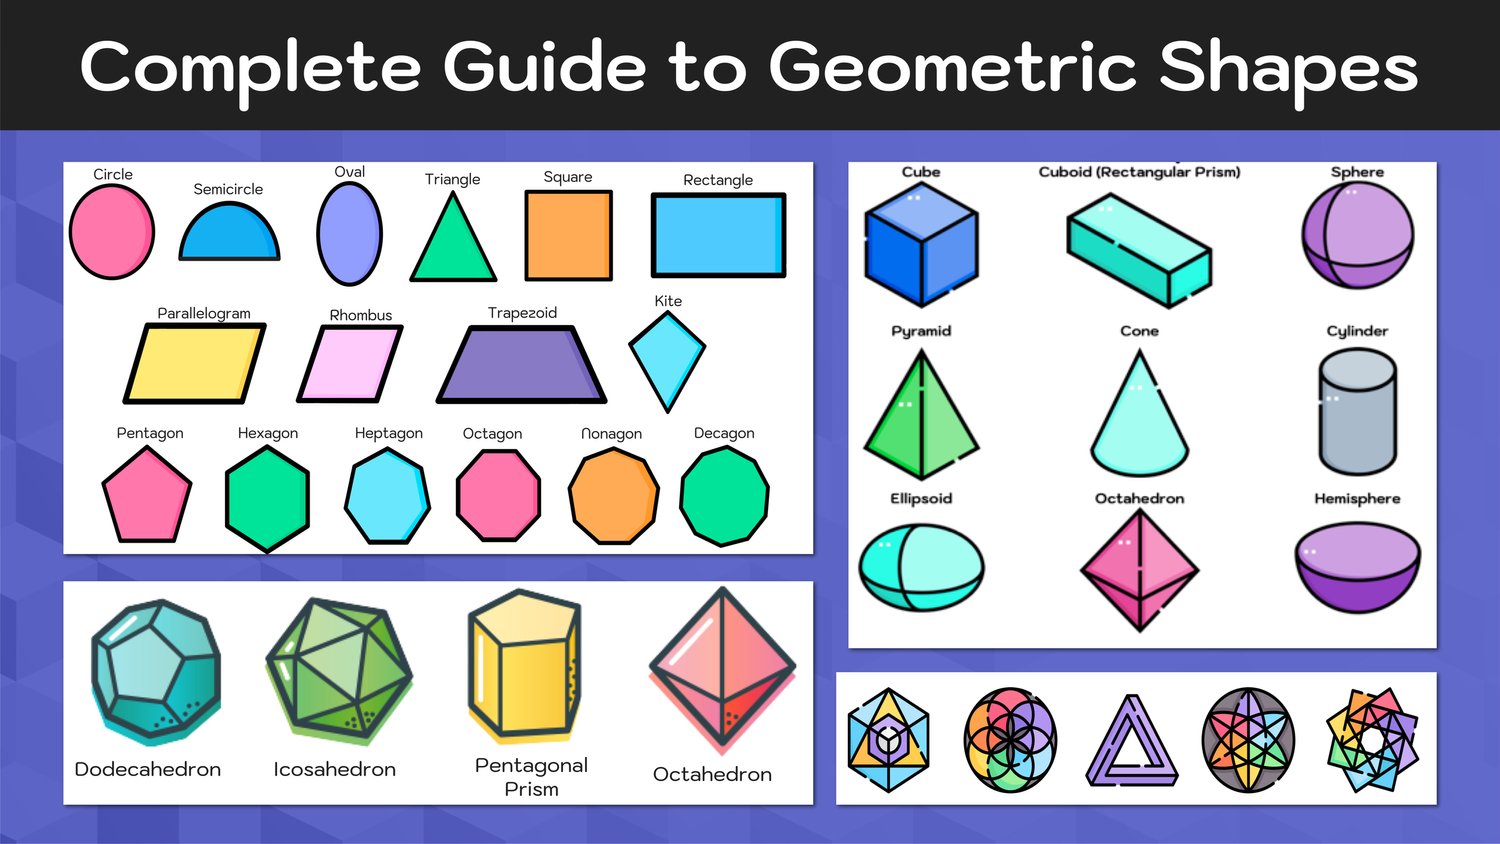 Geometric Shapes—Complete with Free Printable Chart — Mashup Math